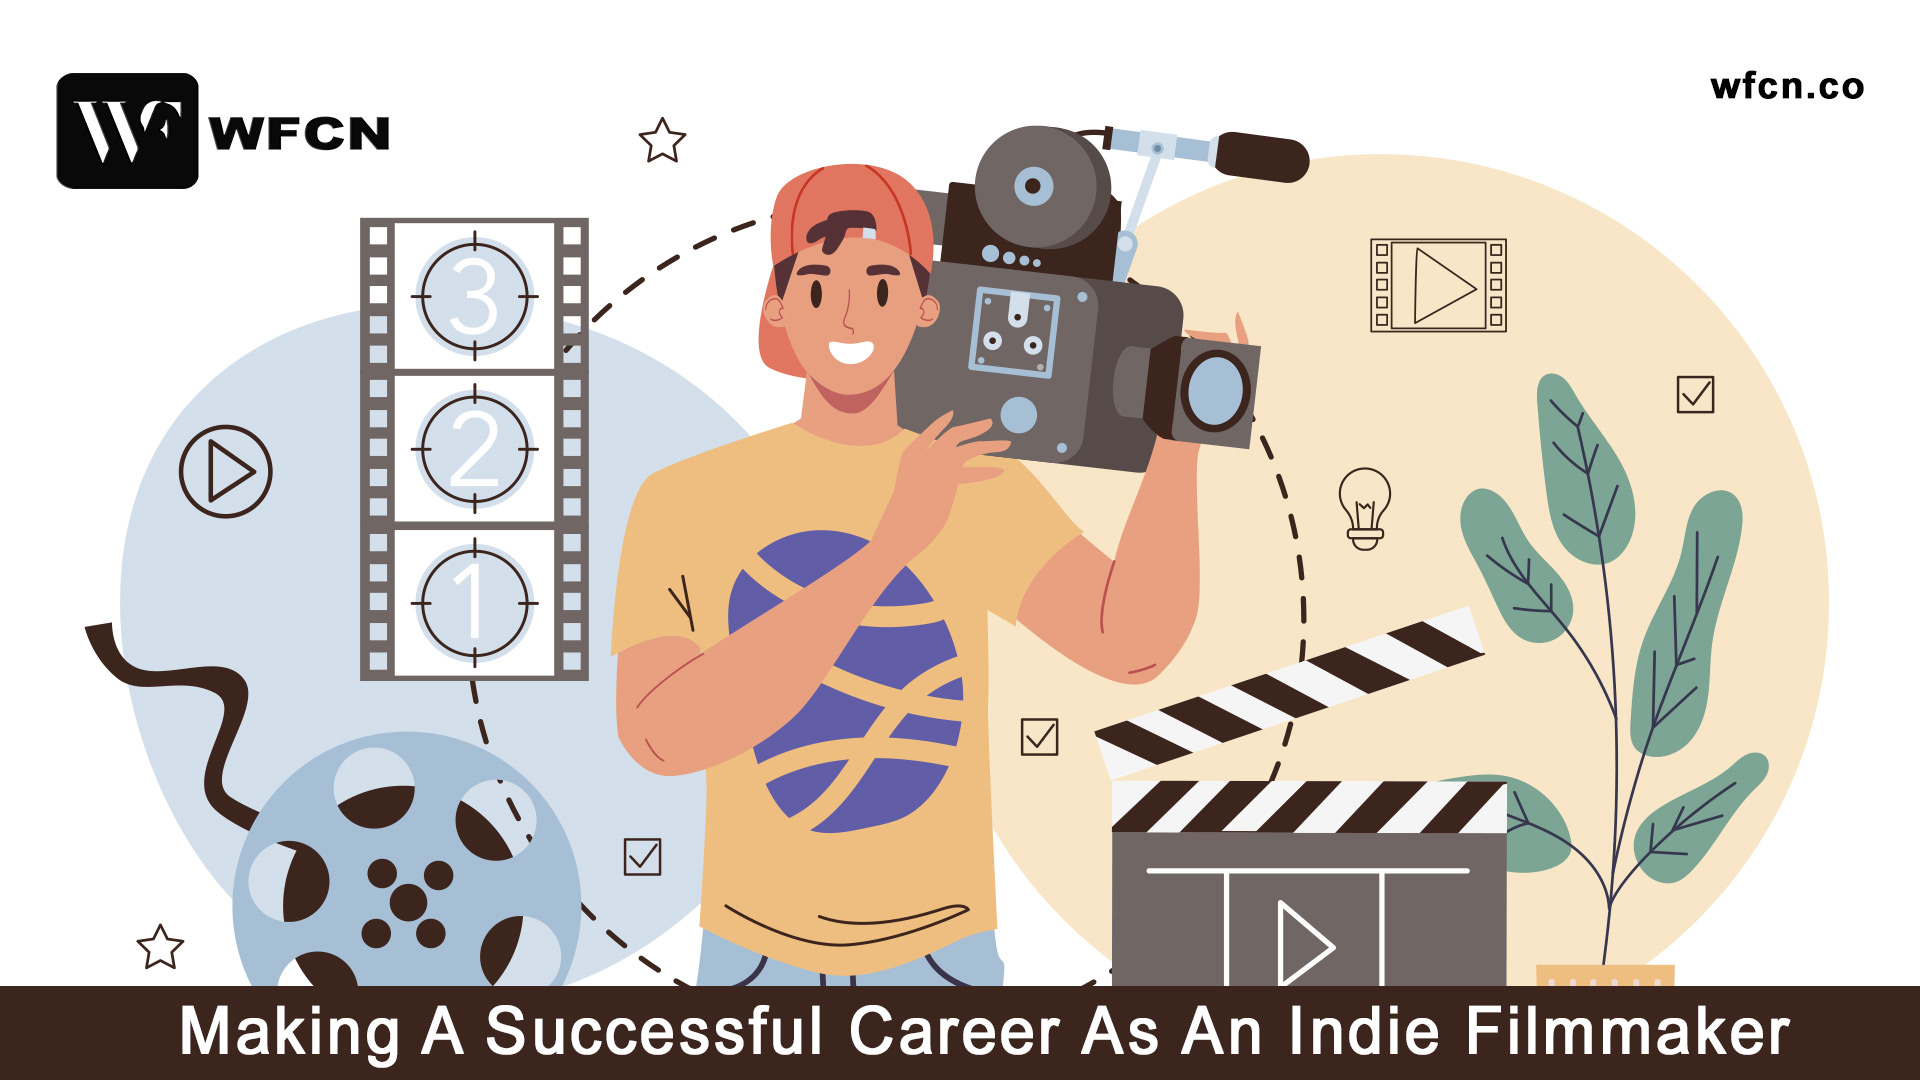 Independent Filmmaker: Your path to survive and succeed